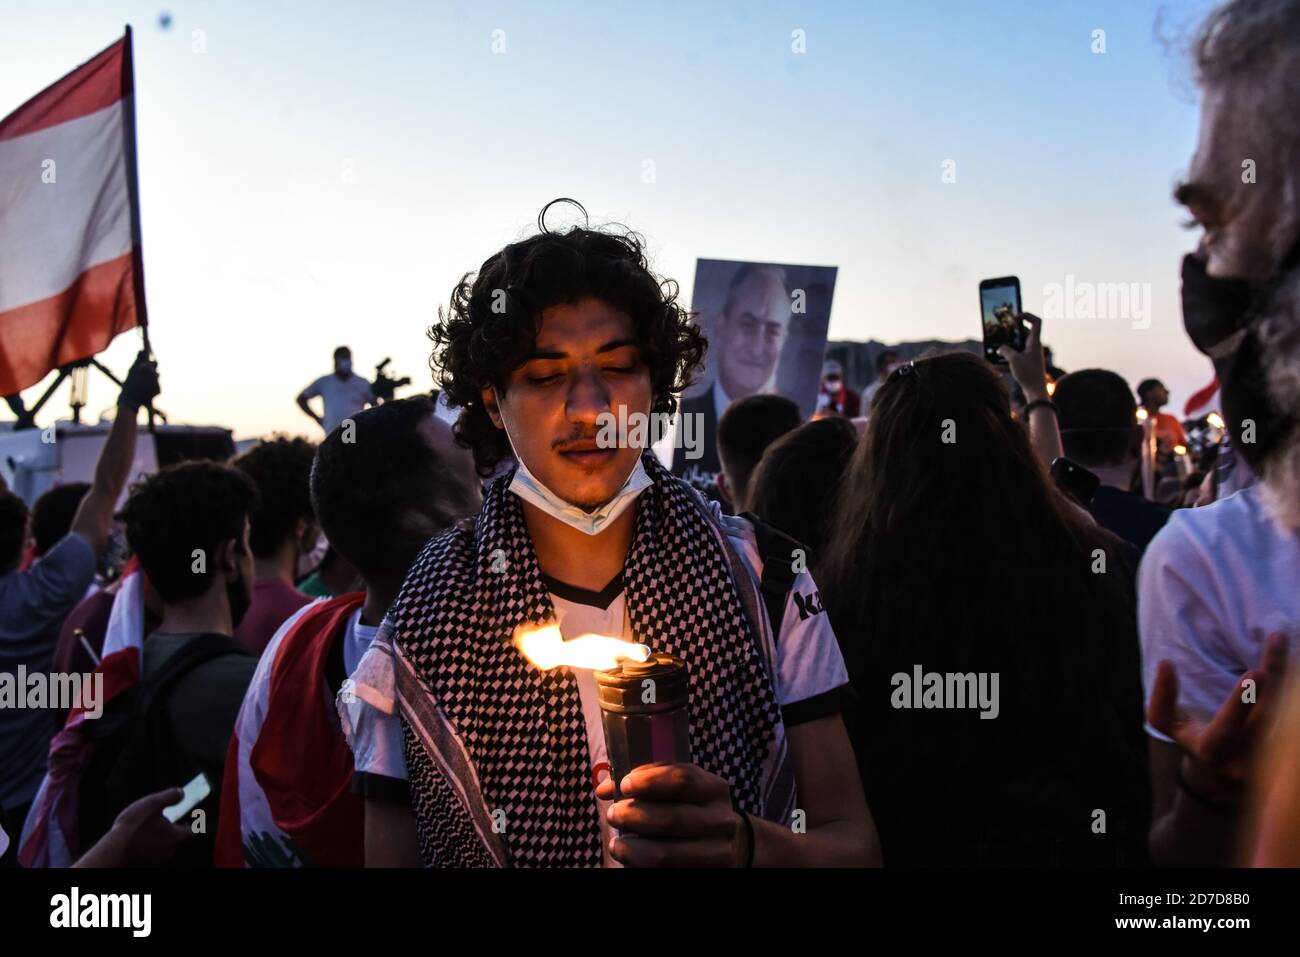 Beirut, Lebanon, 17 October 2020. A man carrying a torch, as a low turn-out of protesters gather on the Charles helou Highway next to the Port of Beirut to mark the anniversary of the Lebanese Thawra, one year after protests began on 17 October 2019 Stock Photo